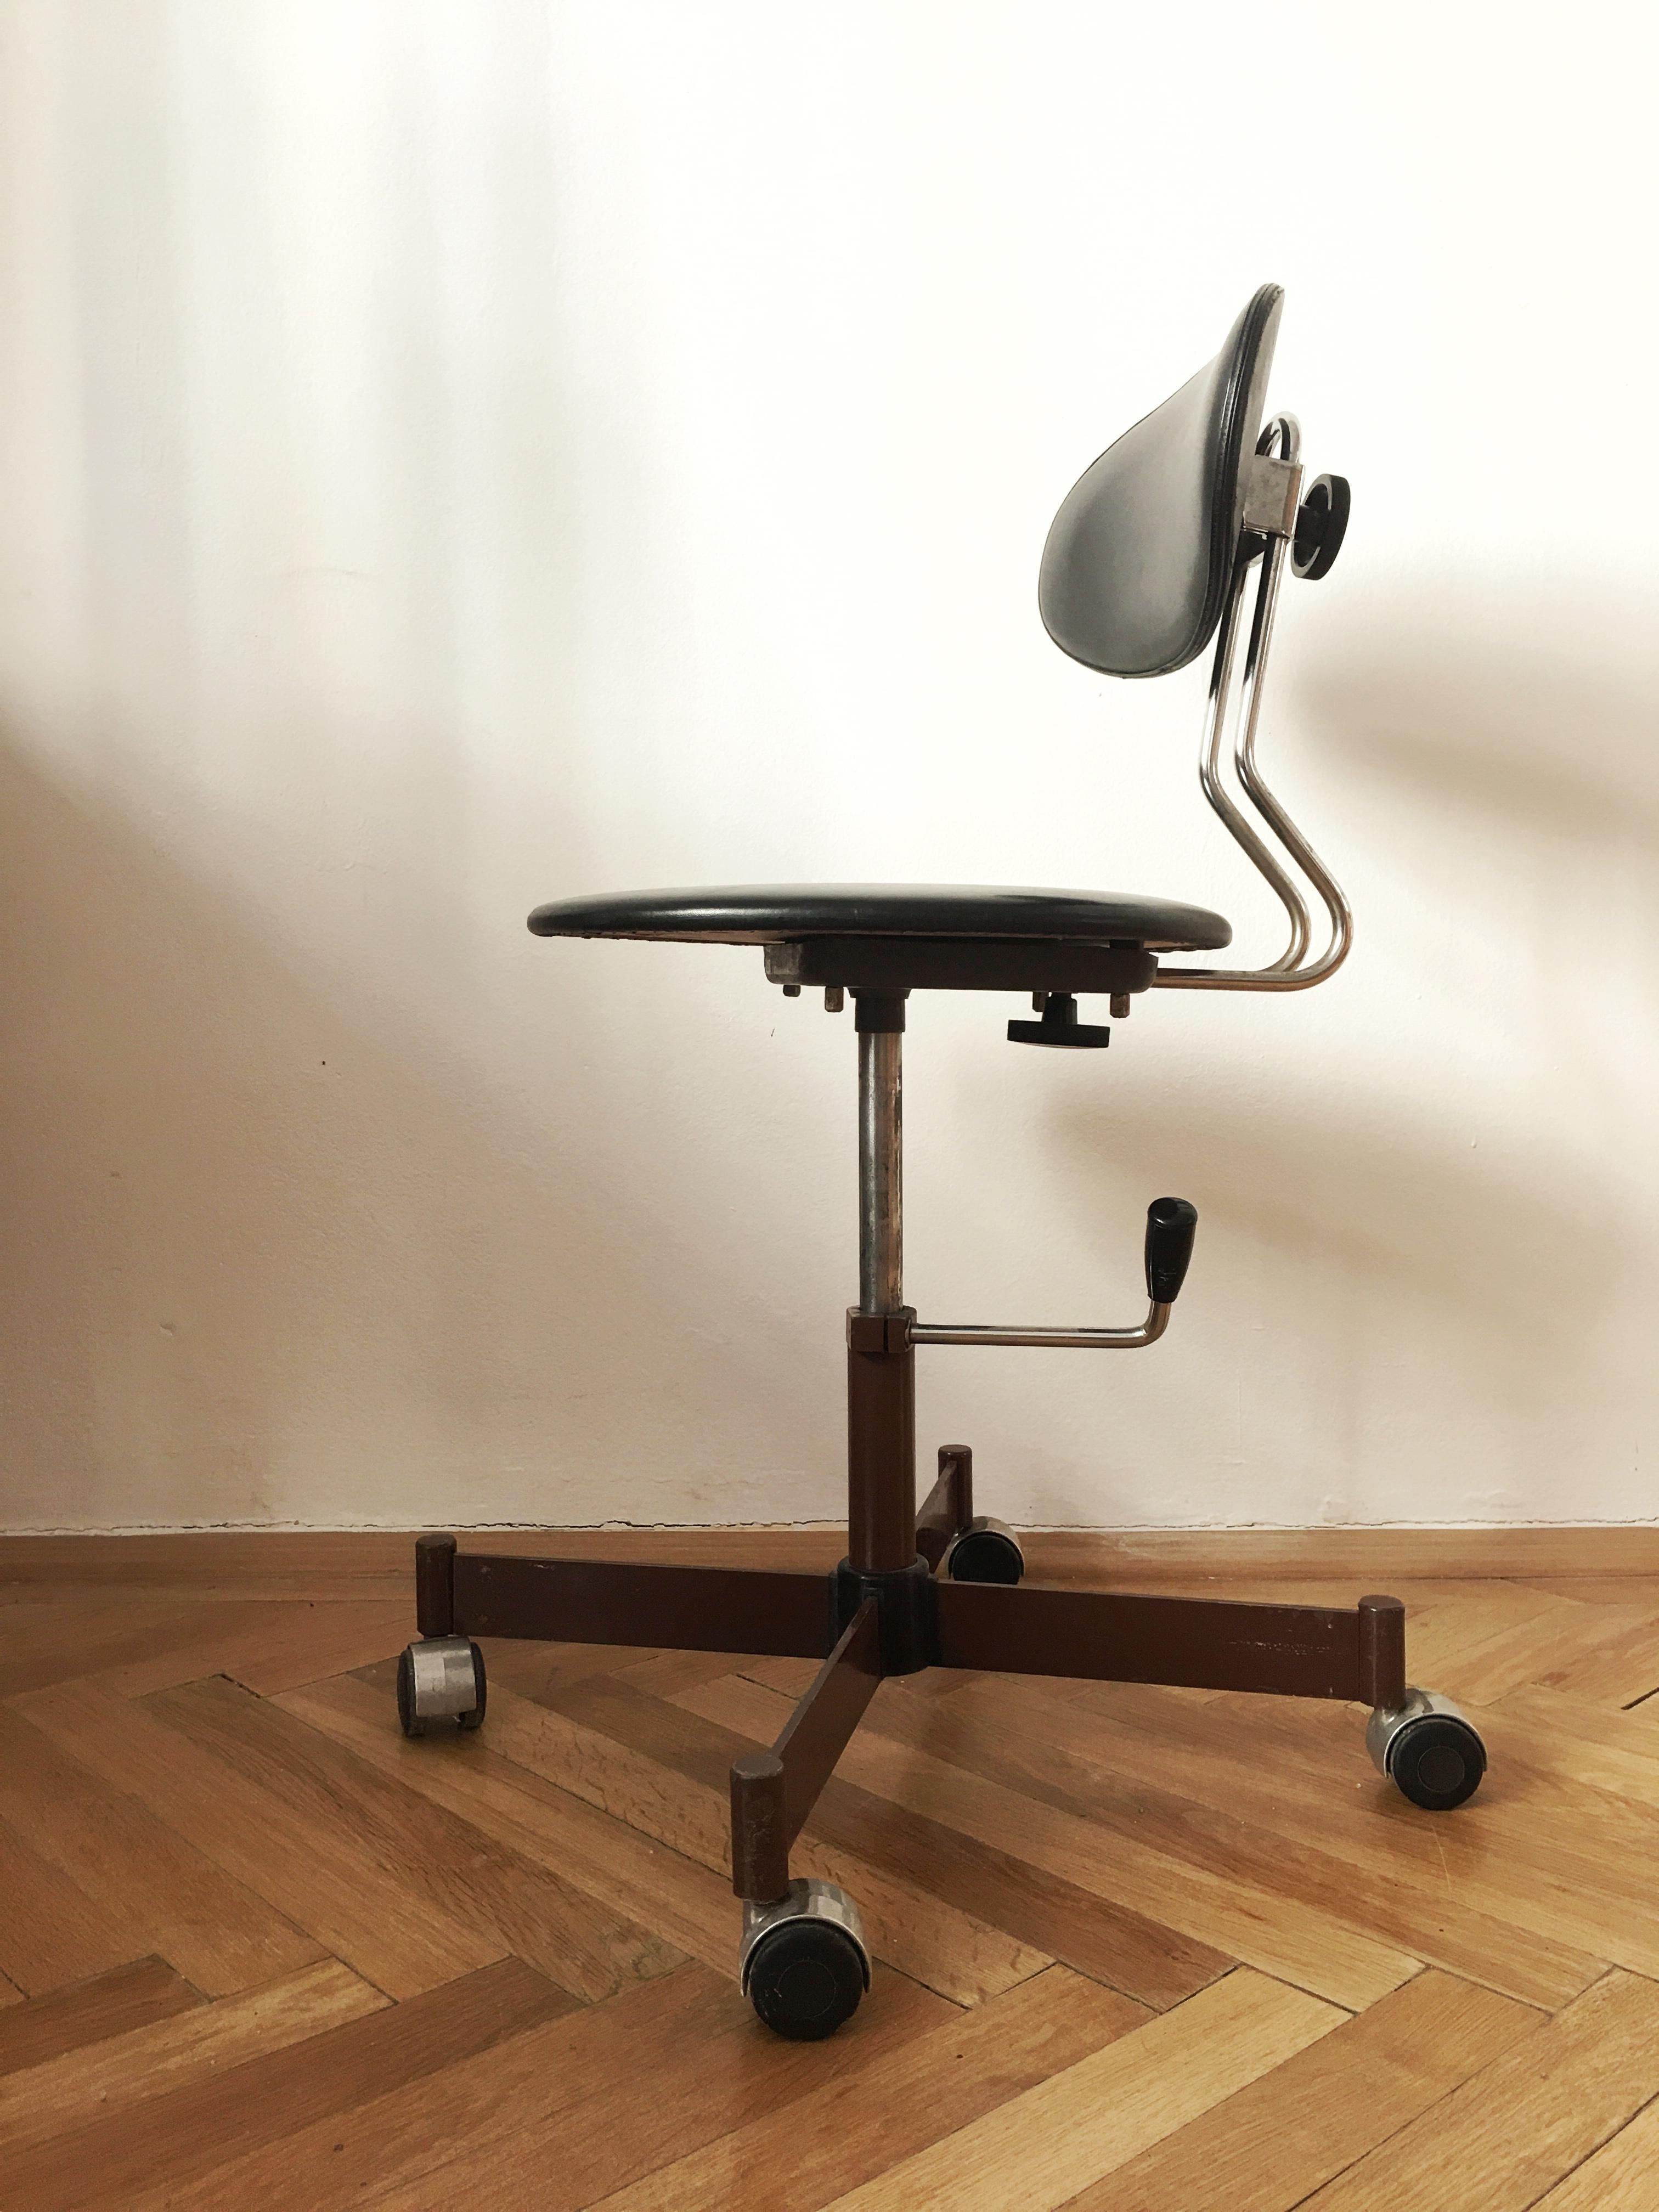 This vintage industrial adjustable office chair was made by Kovona Czechoslovakia in the 1970s.

Measures: H 85 cm x W 65 cm x D 65 cm.